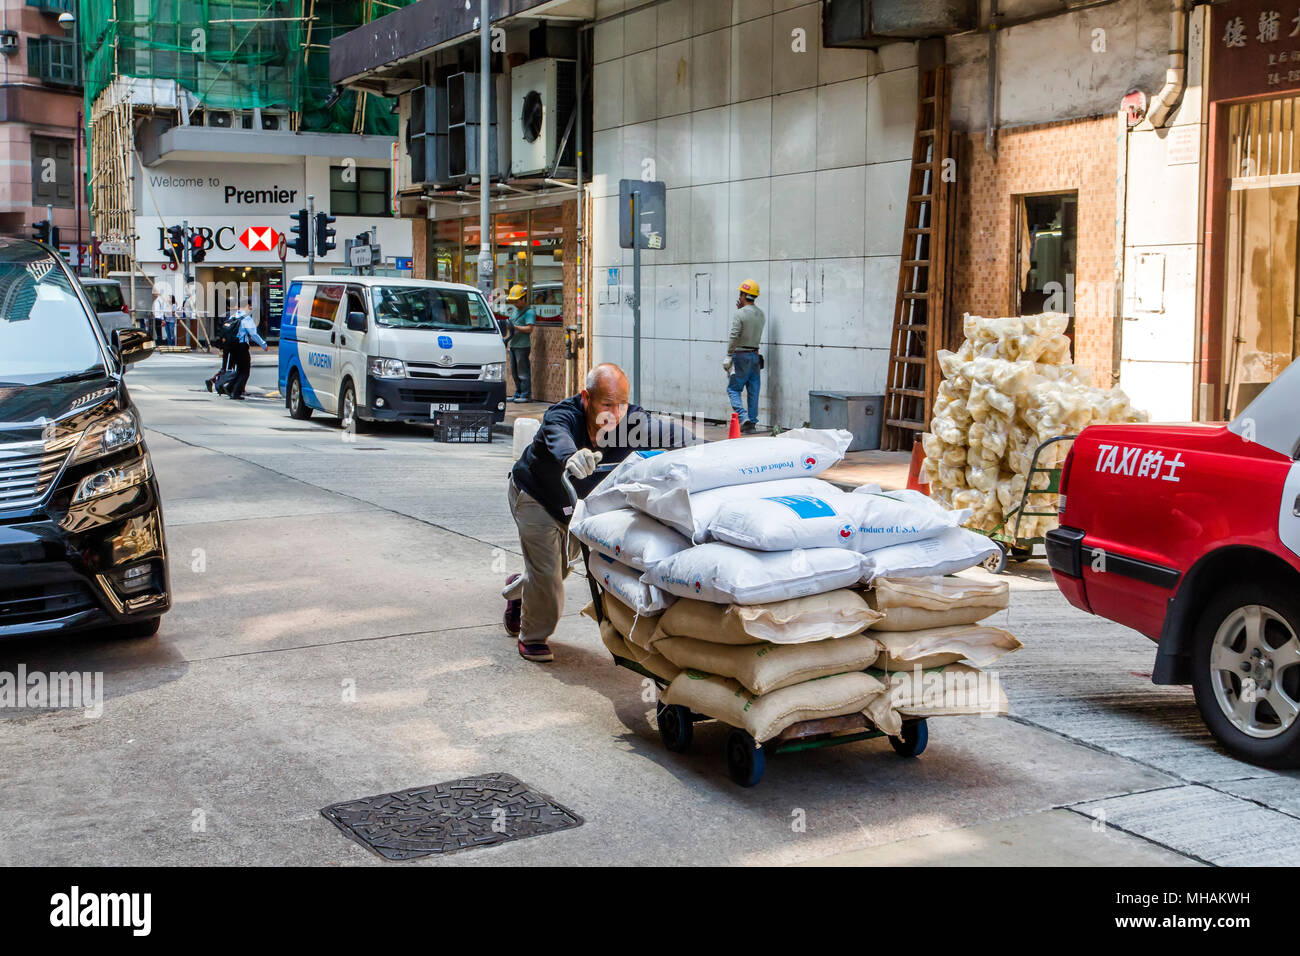 An elderly Asian man pushes a trolley loaded with sacks of goods through a street in Hong Kong Island.  Some sacks are marked as product of U.S.A. Stock Photo